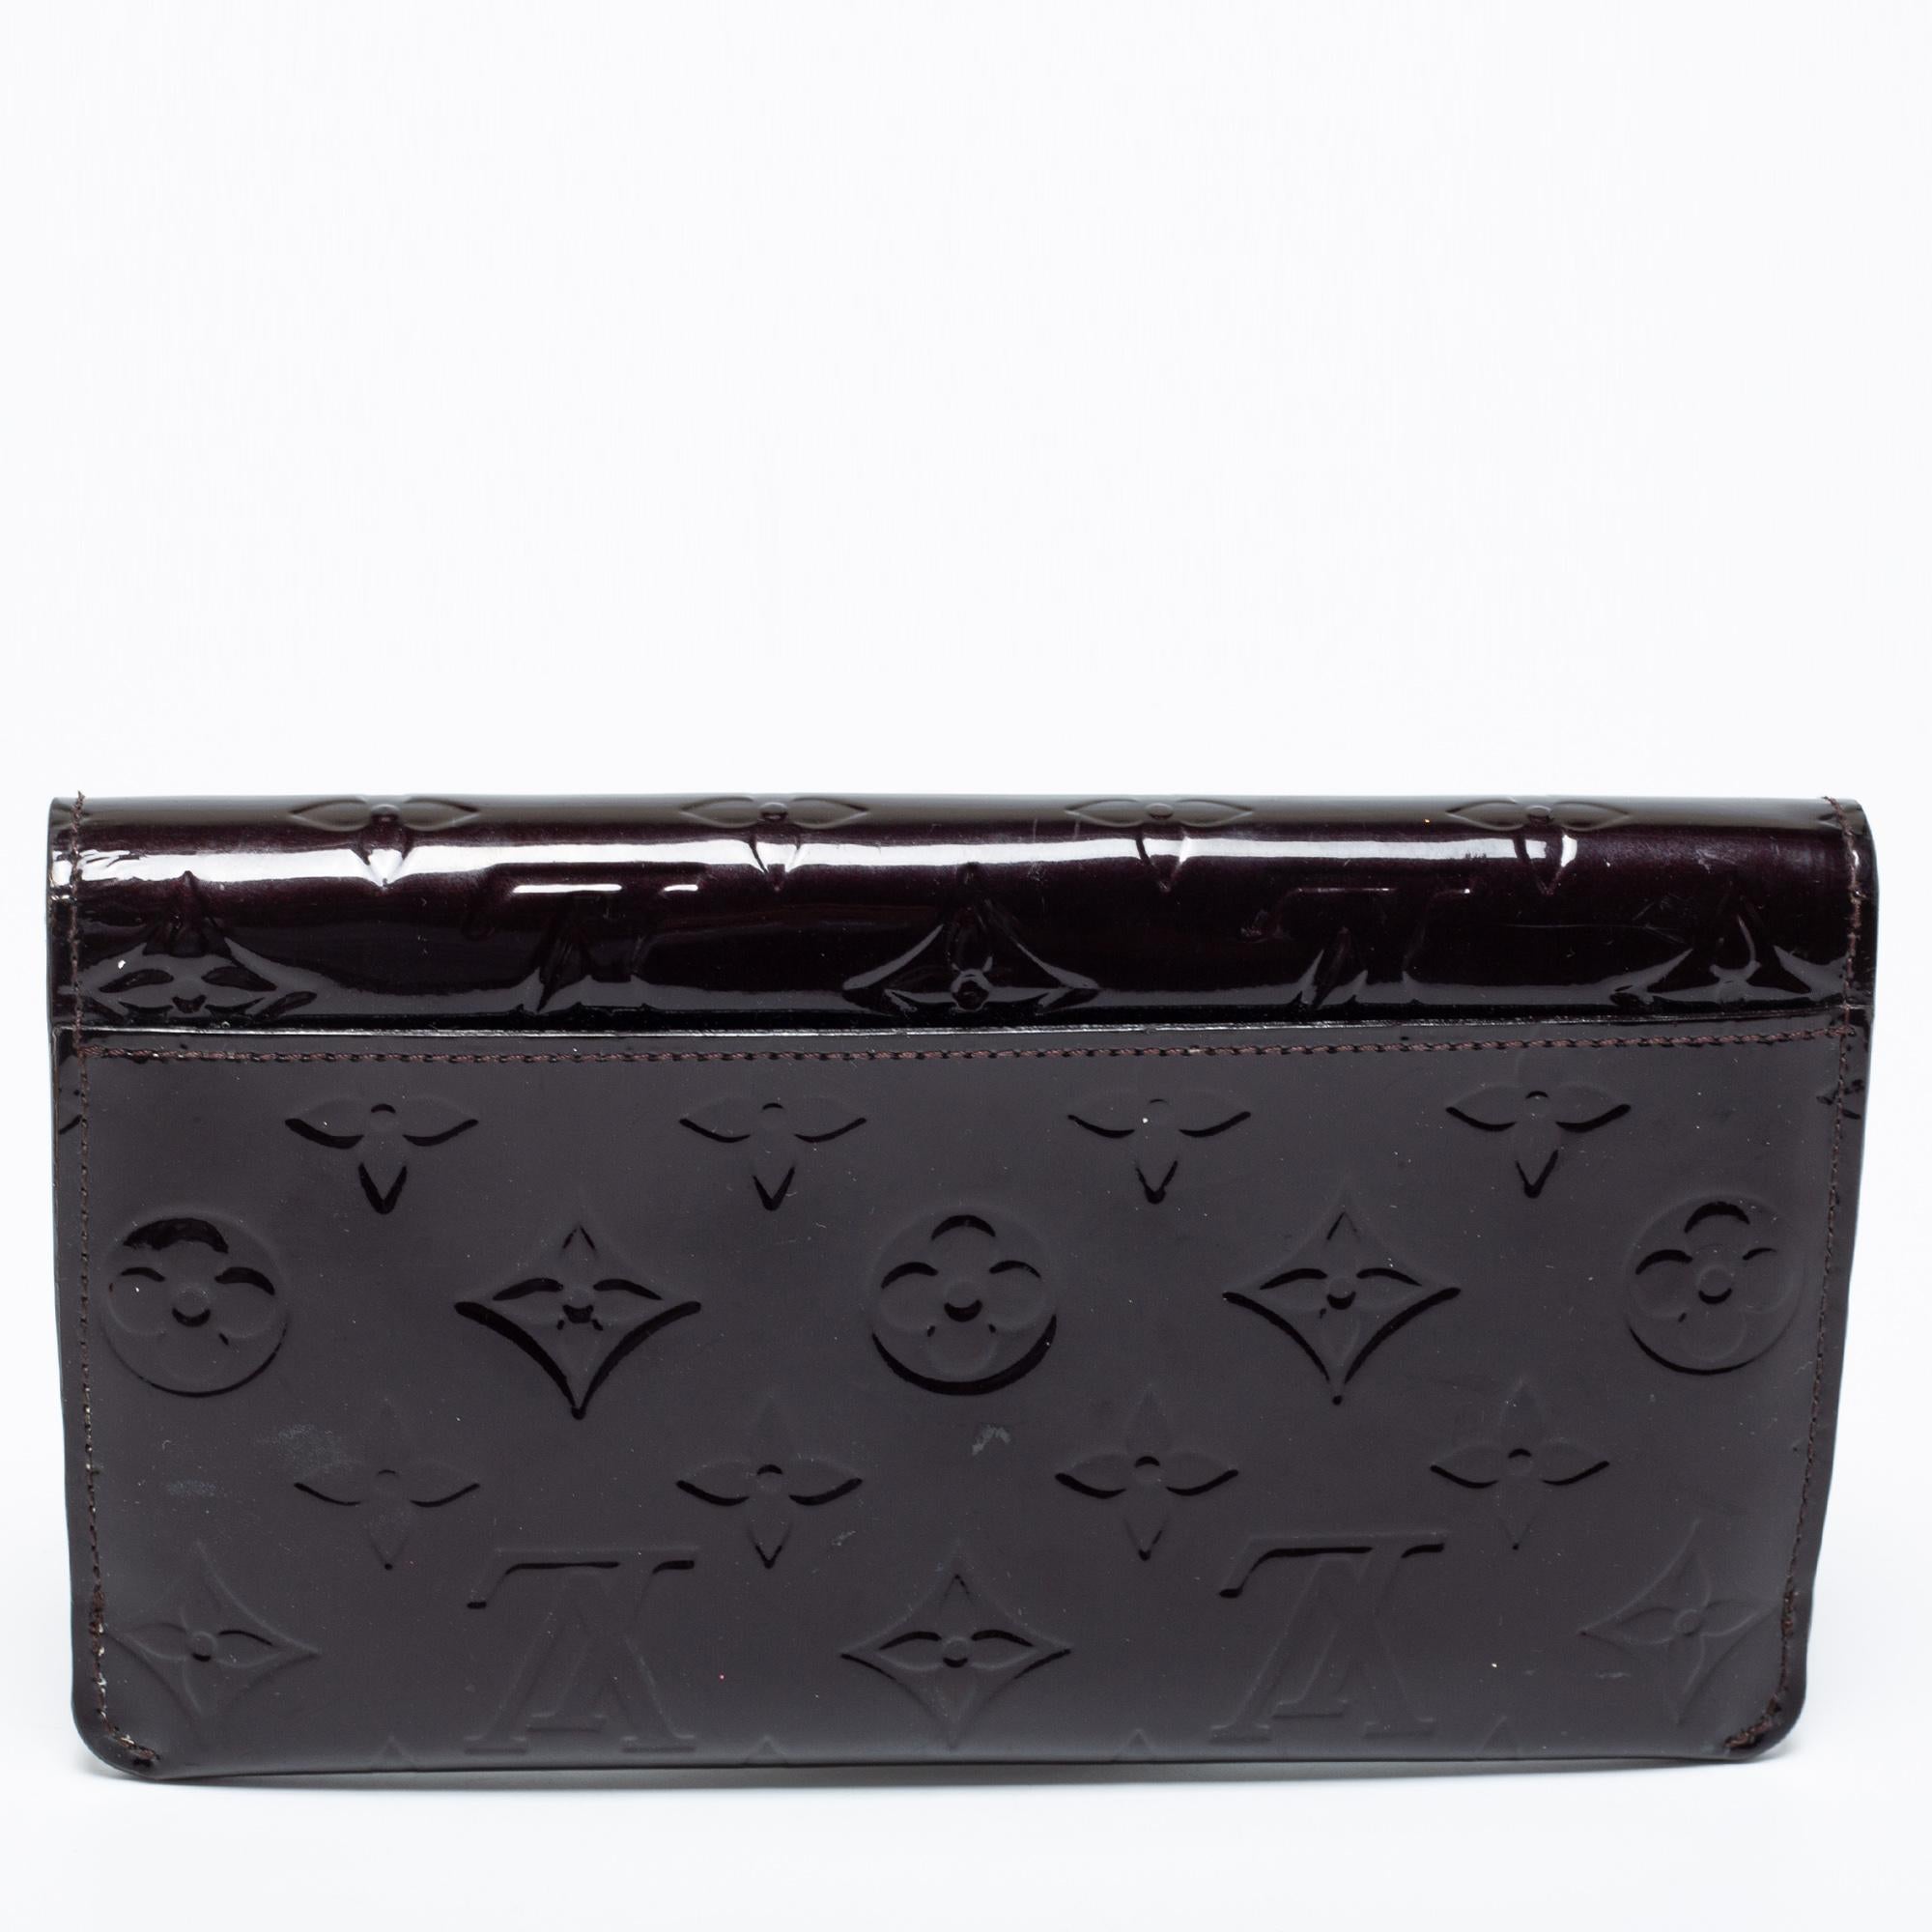 Made using Monogram Vernis, this continental wallet from Louis Vuitton has a simple look and functional quality. The flap opens to a sleek interior featuring a zip pocket and card slots.

Includes: Info Booklet, Pouch